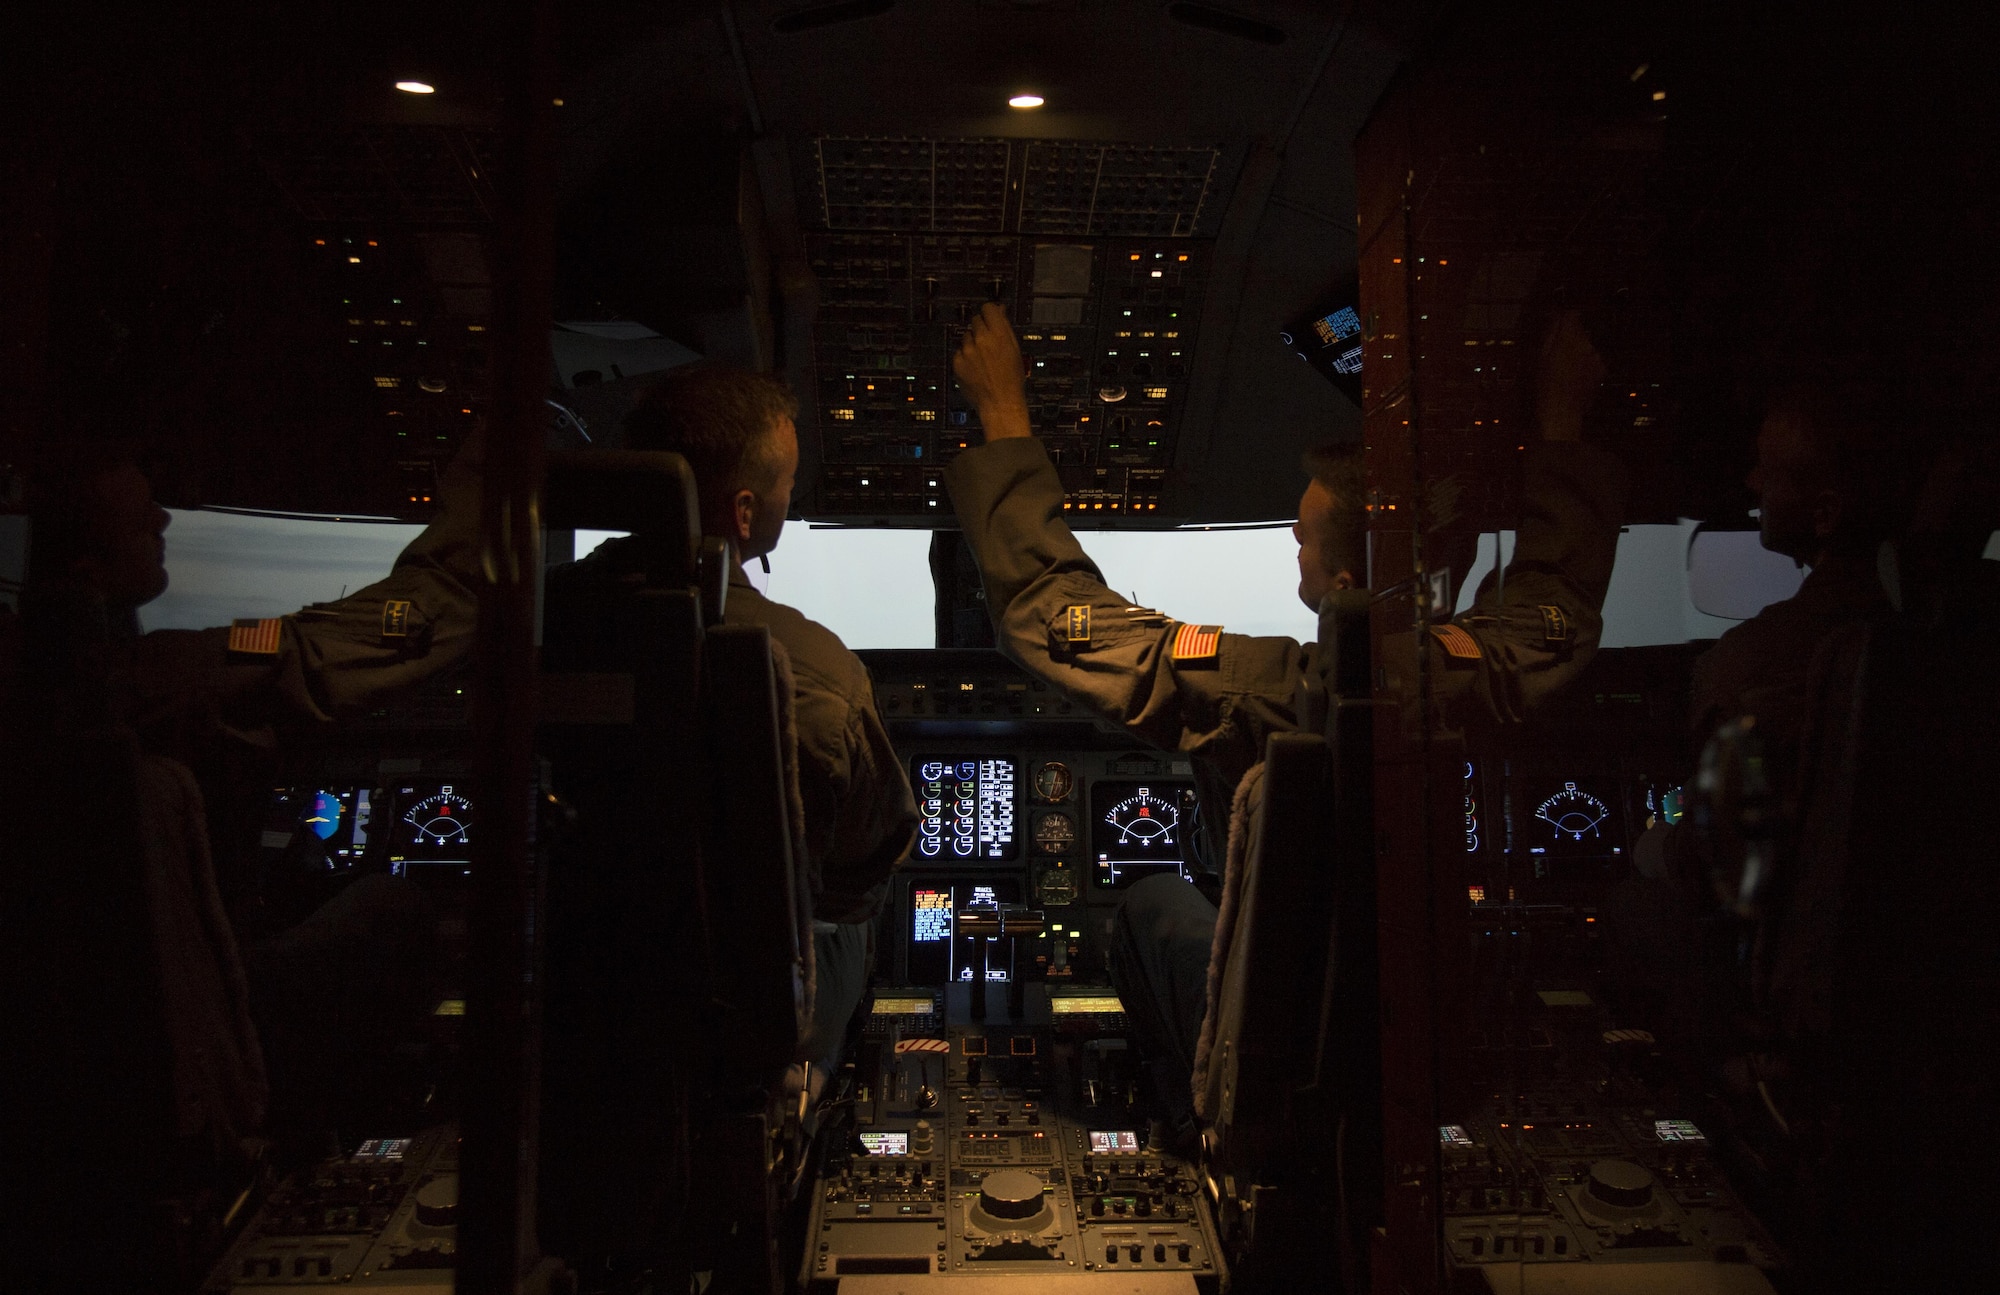 U.S. Air Force Tech. Sgt. Ryan Lilly, left, a flight engineer, and Tech. Sgt. Ben Doyle, right, the NCO in charge of flight engineers assigned to the 310th Airlift Squadron, preform preflight checklist procedures at MacDill Air Force Base, Fla., April 13, 2017. Preflight checklists are completed before every flight. (U.S. Air Force photo by Airman 1st Class Mariette Adams)